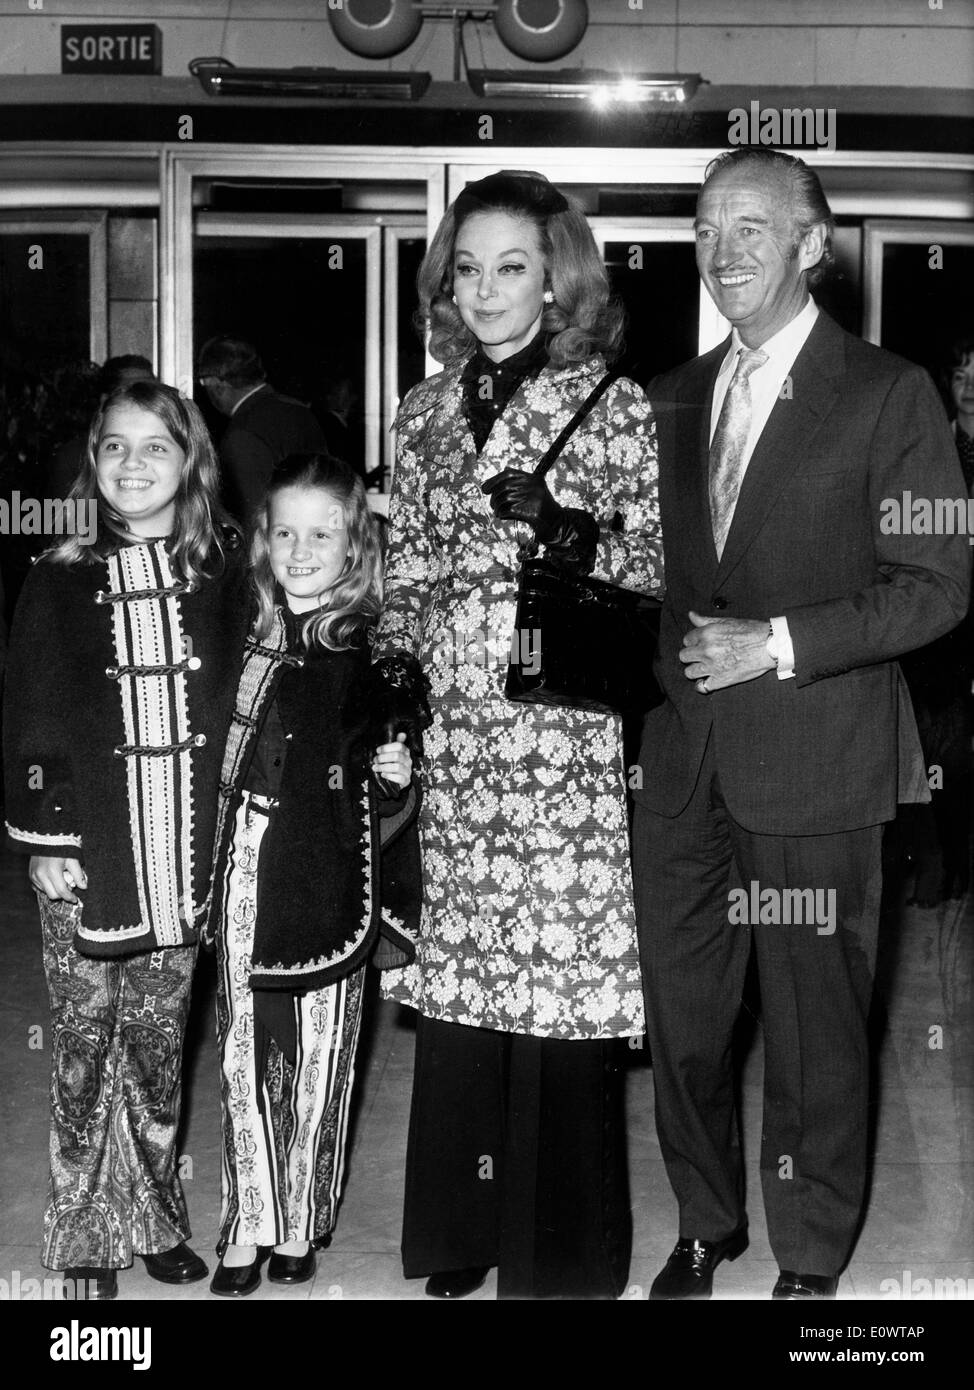 Actor David Niven with his family at a film premiere Stock Photo - Alamy